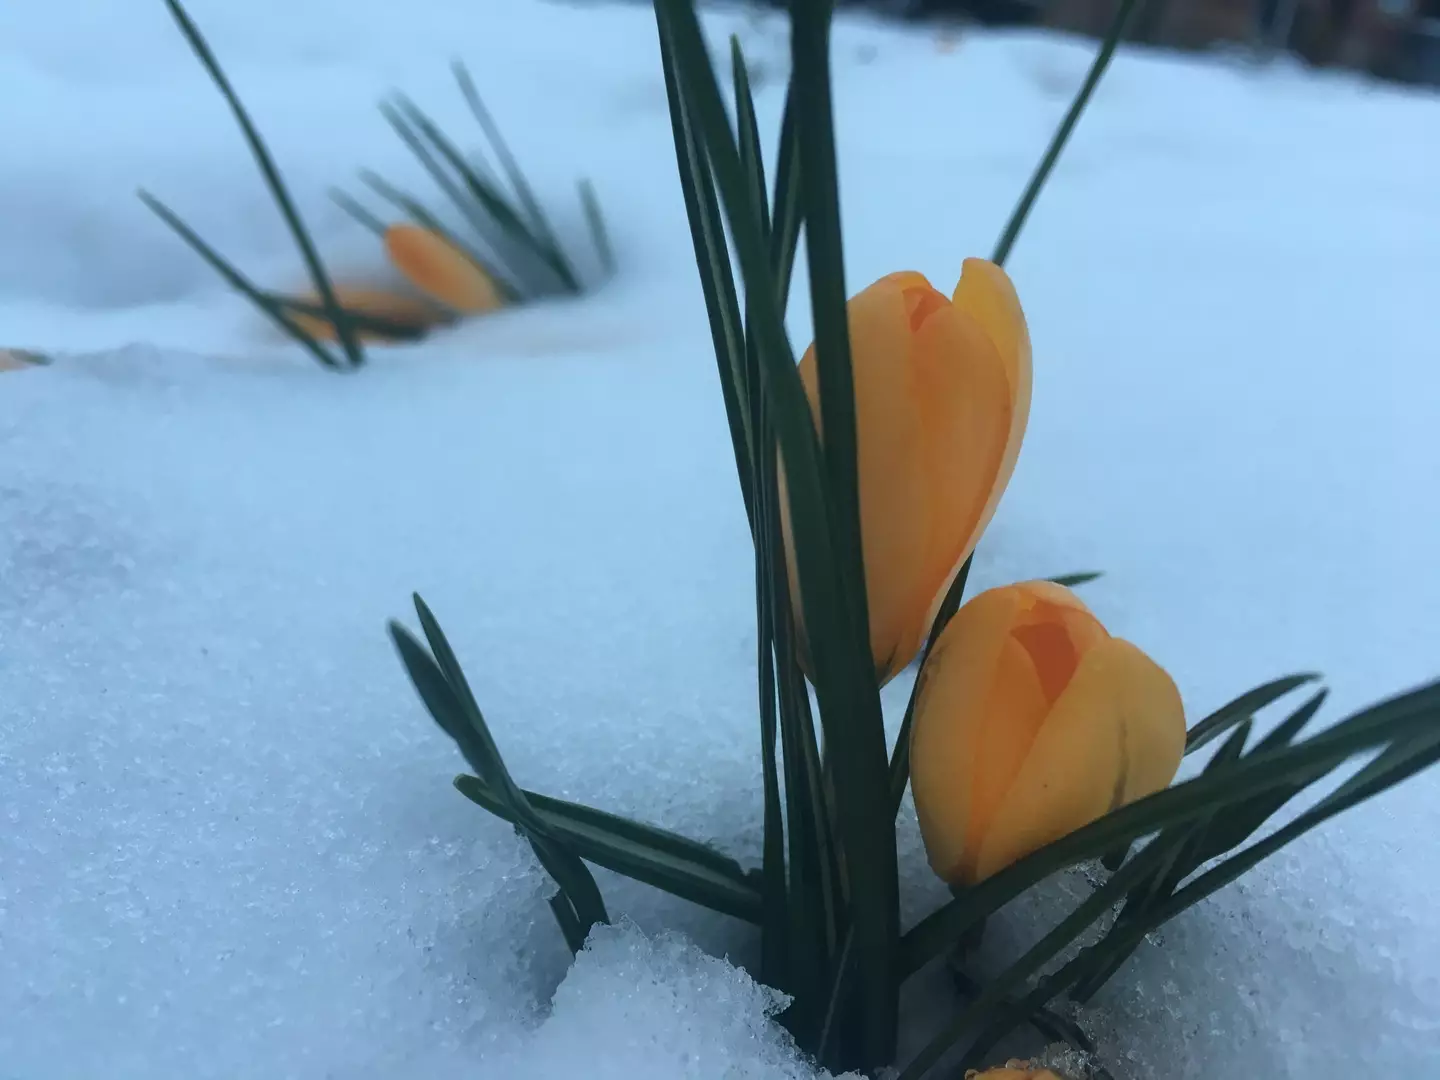 We may be waiting a little longer for spring to make itself known.